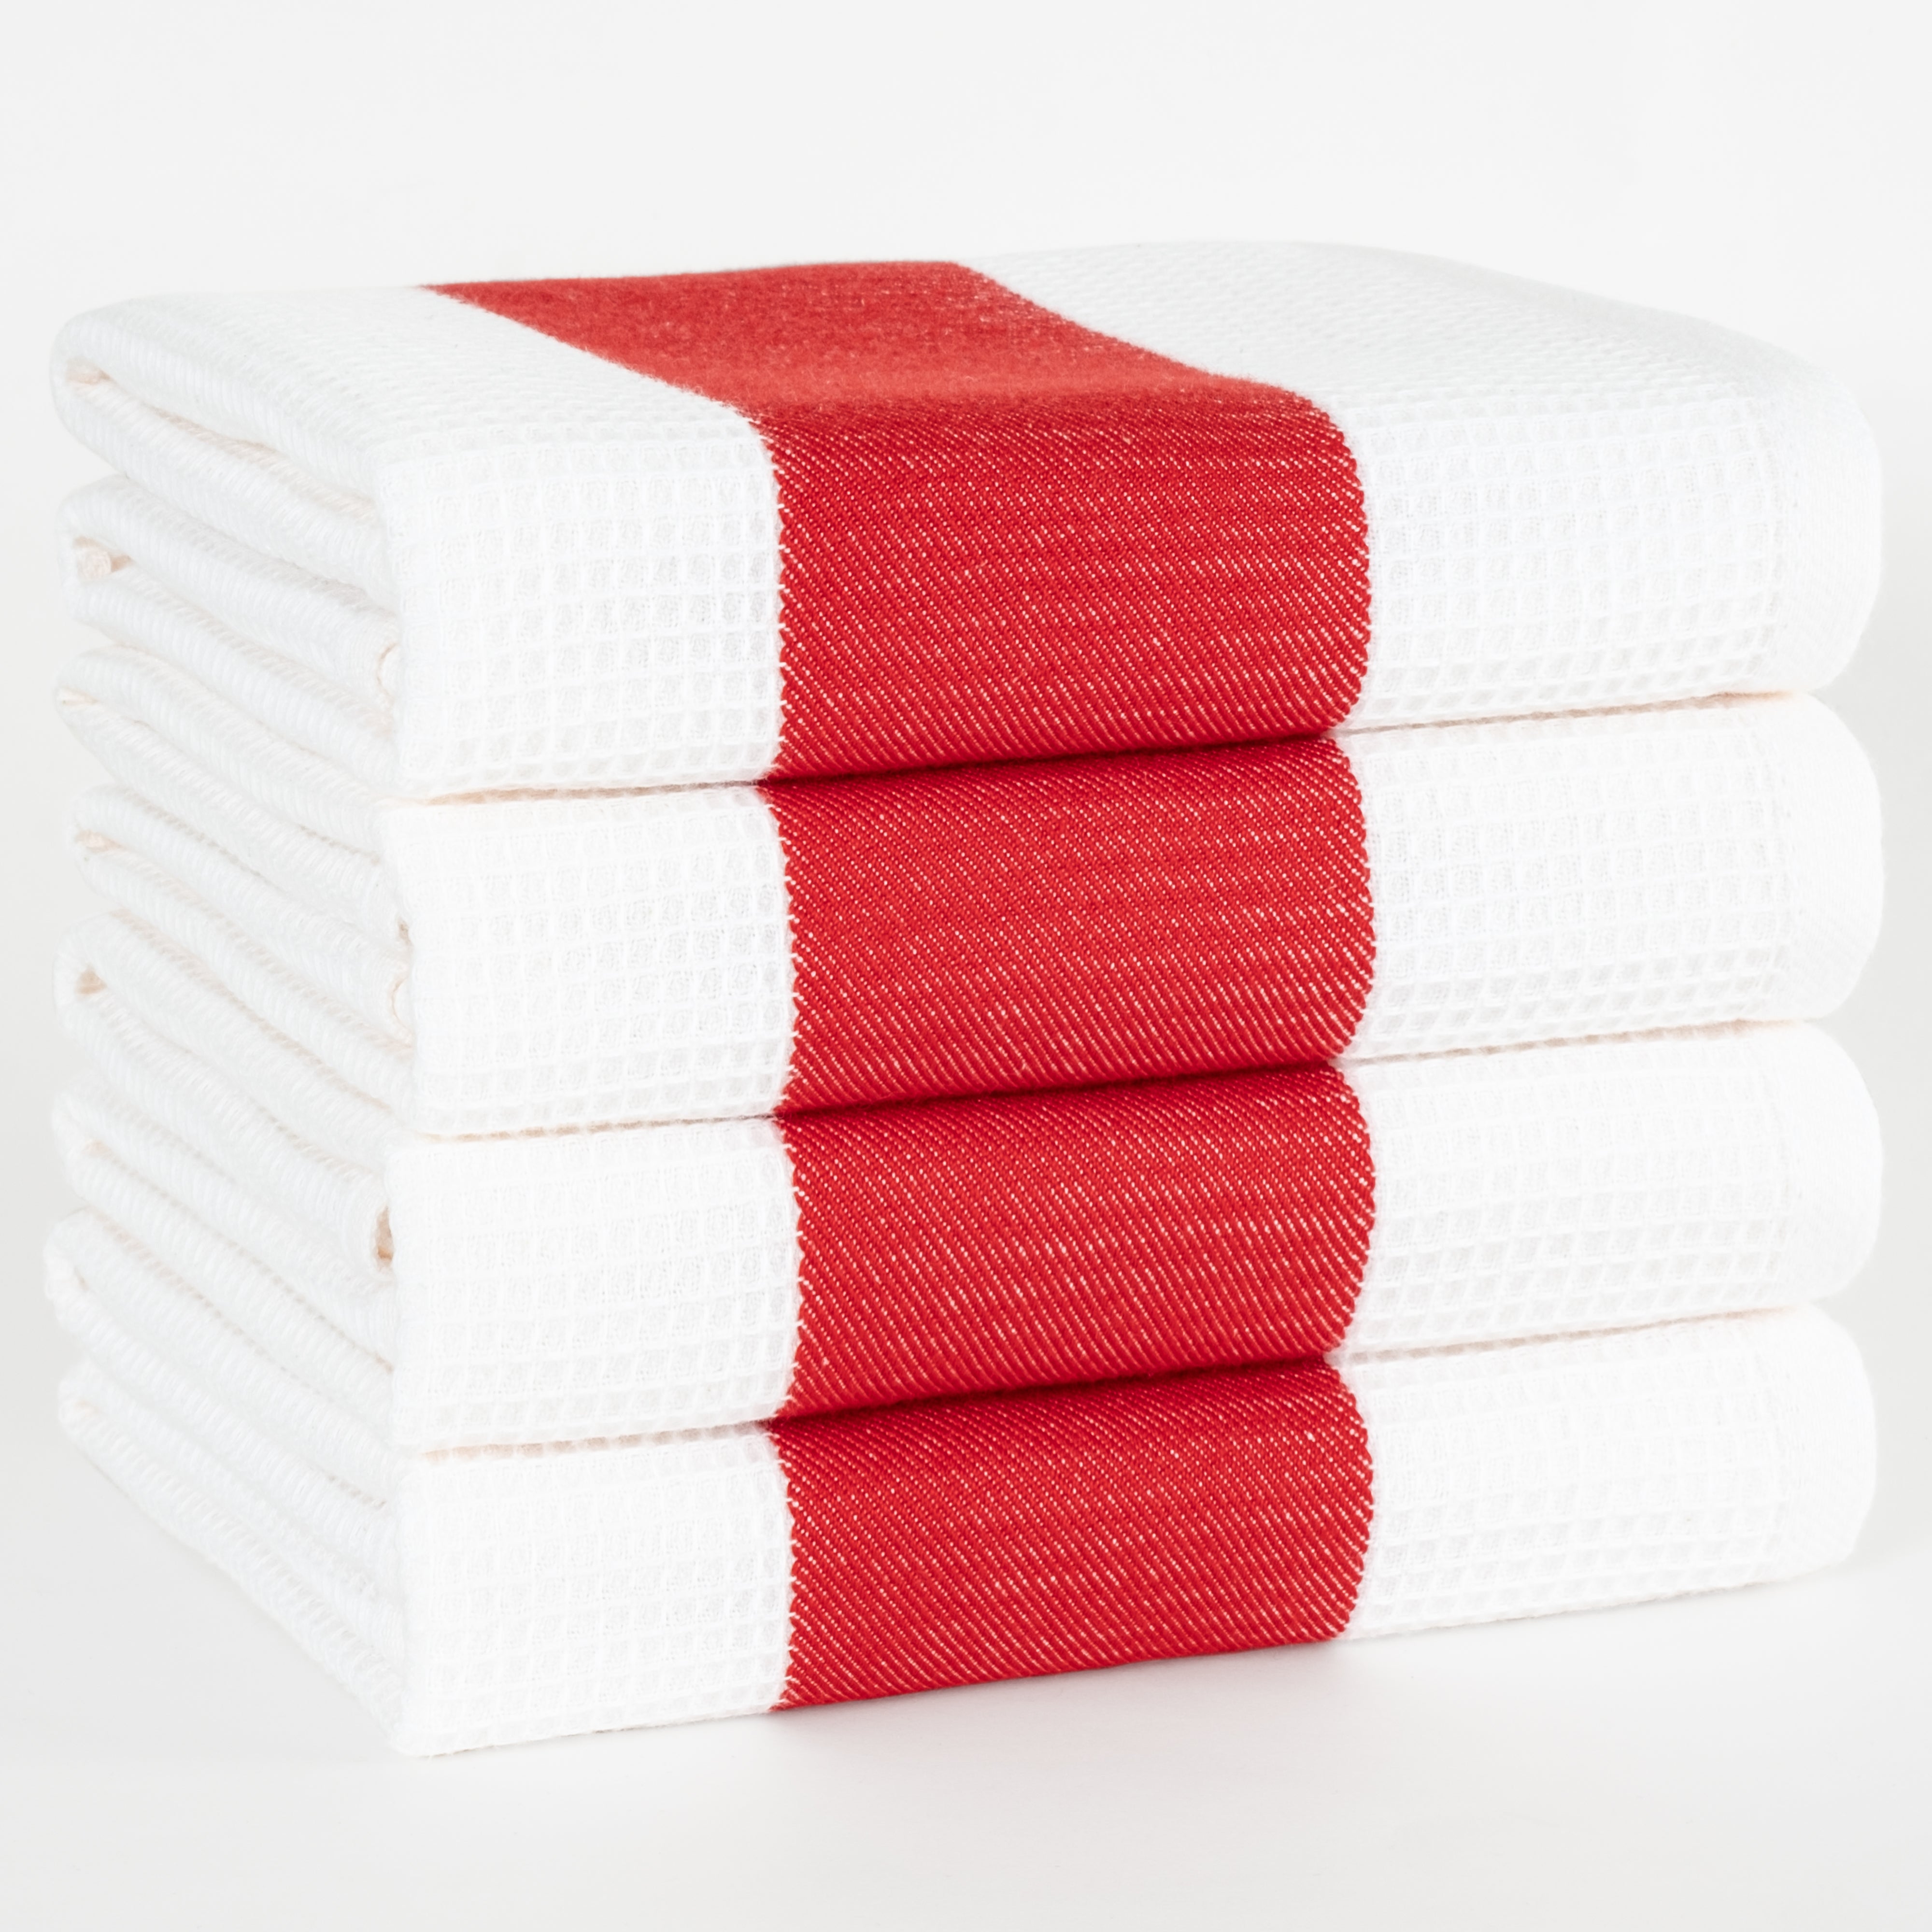 American Soft Linen 4 Packed Dish Towels, 100% Cotton Dish Cloths for Kitchen red-1